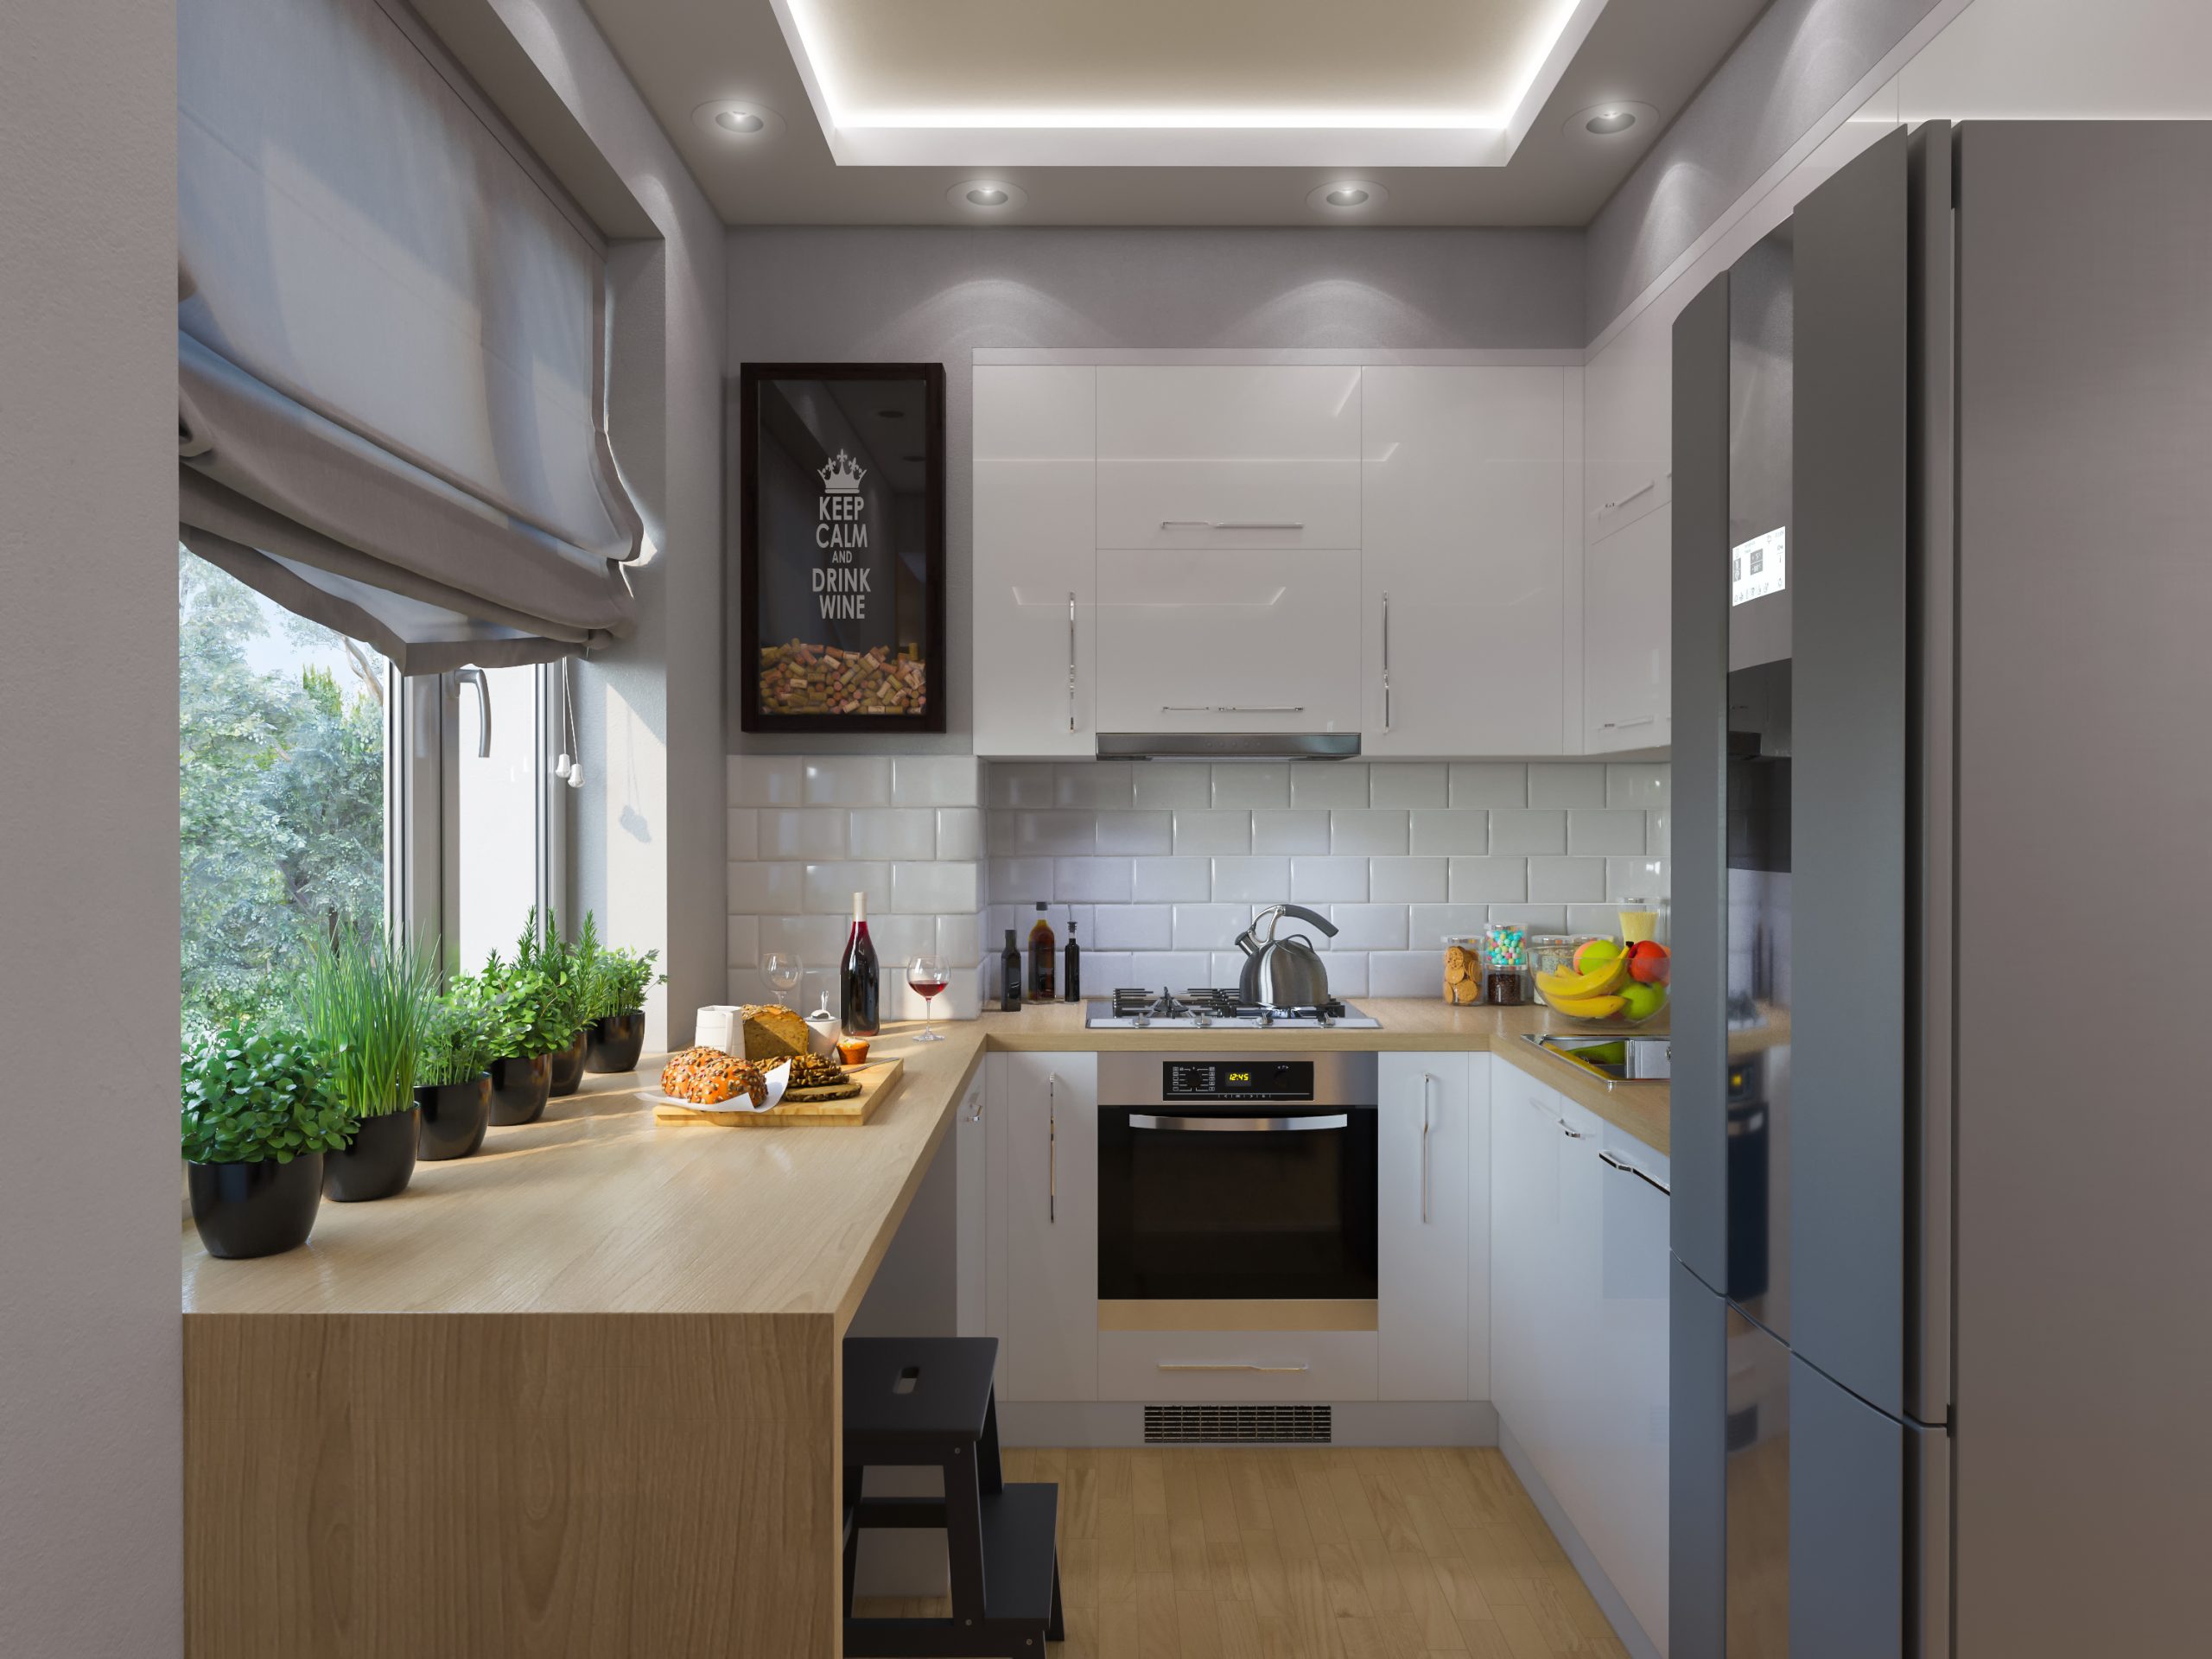 12 Tips for Maximizing Space in Small Kitchens